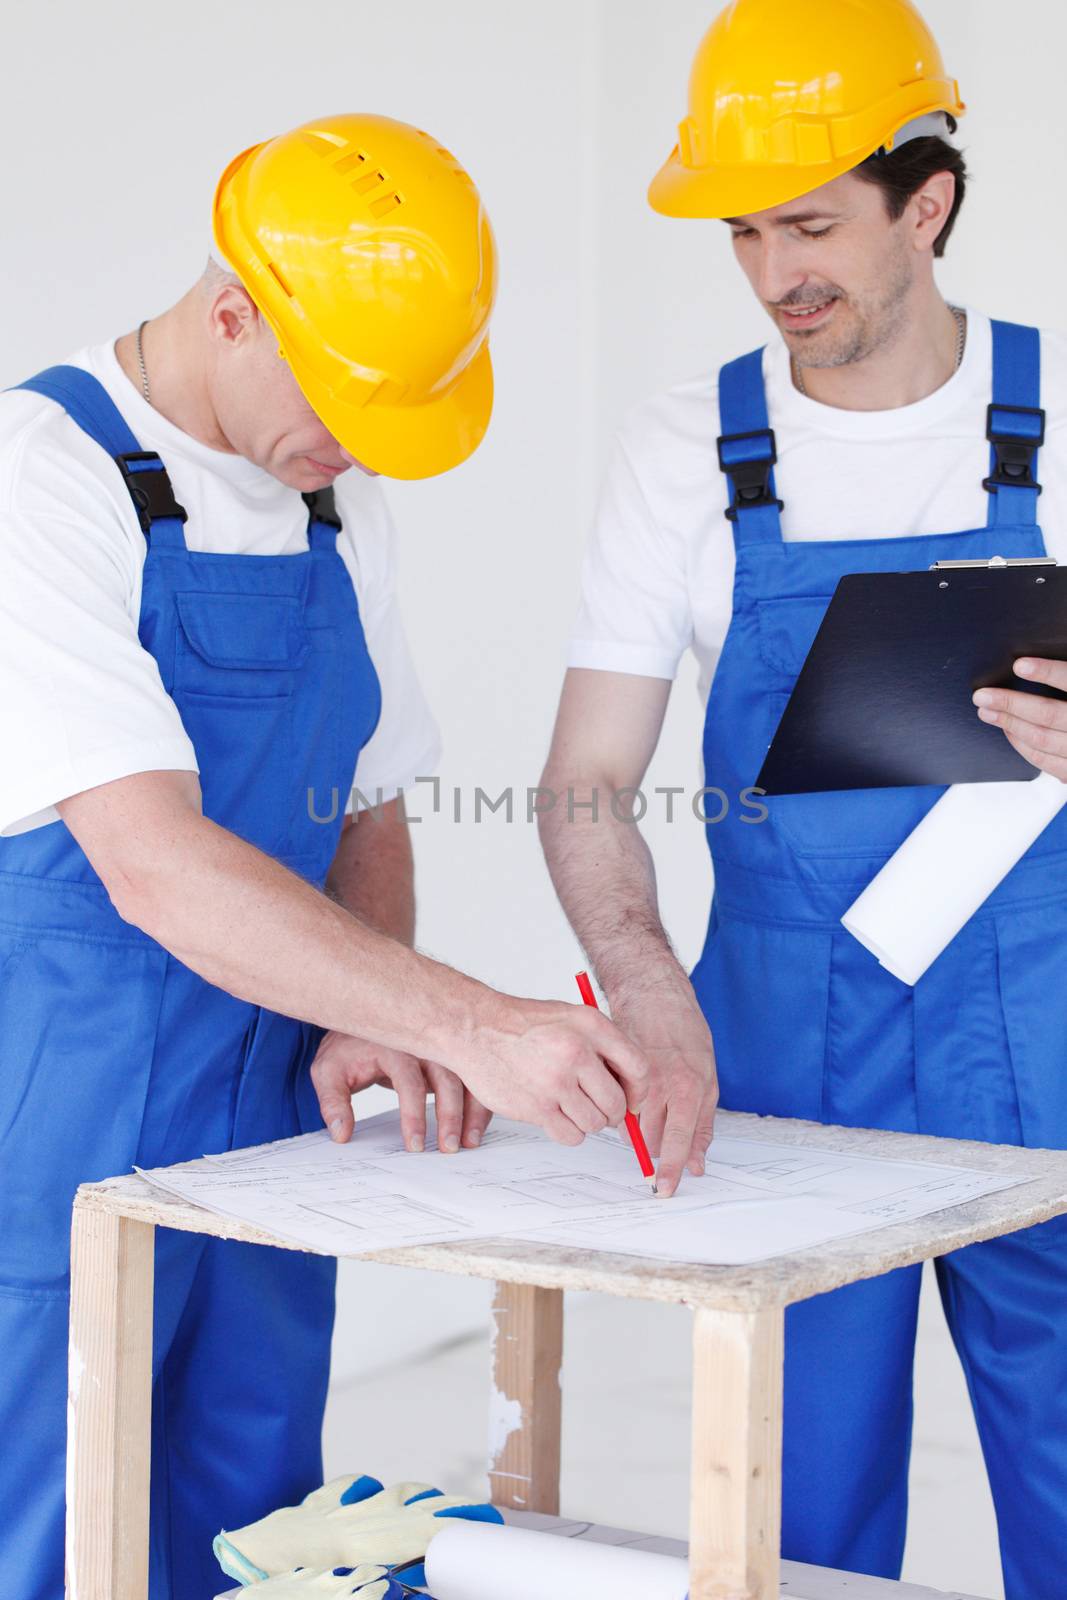 Two workers correcting a construction plan